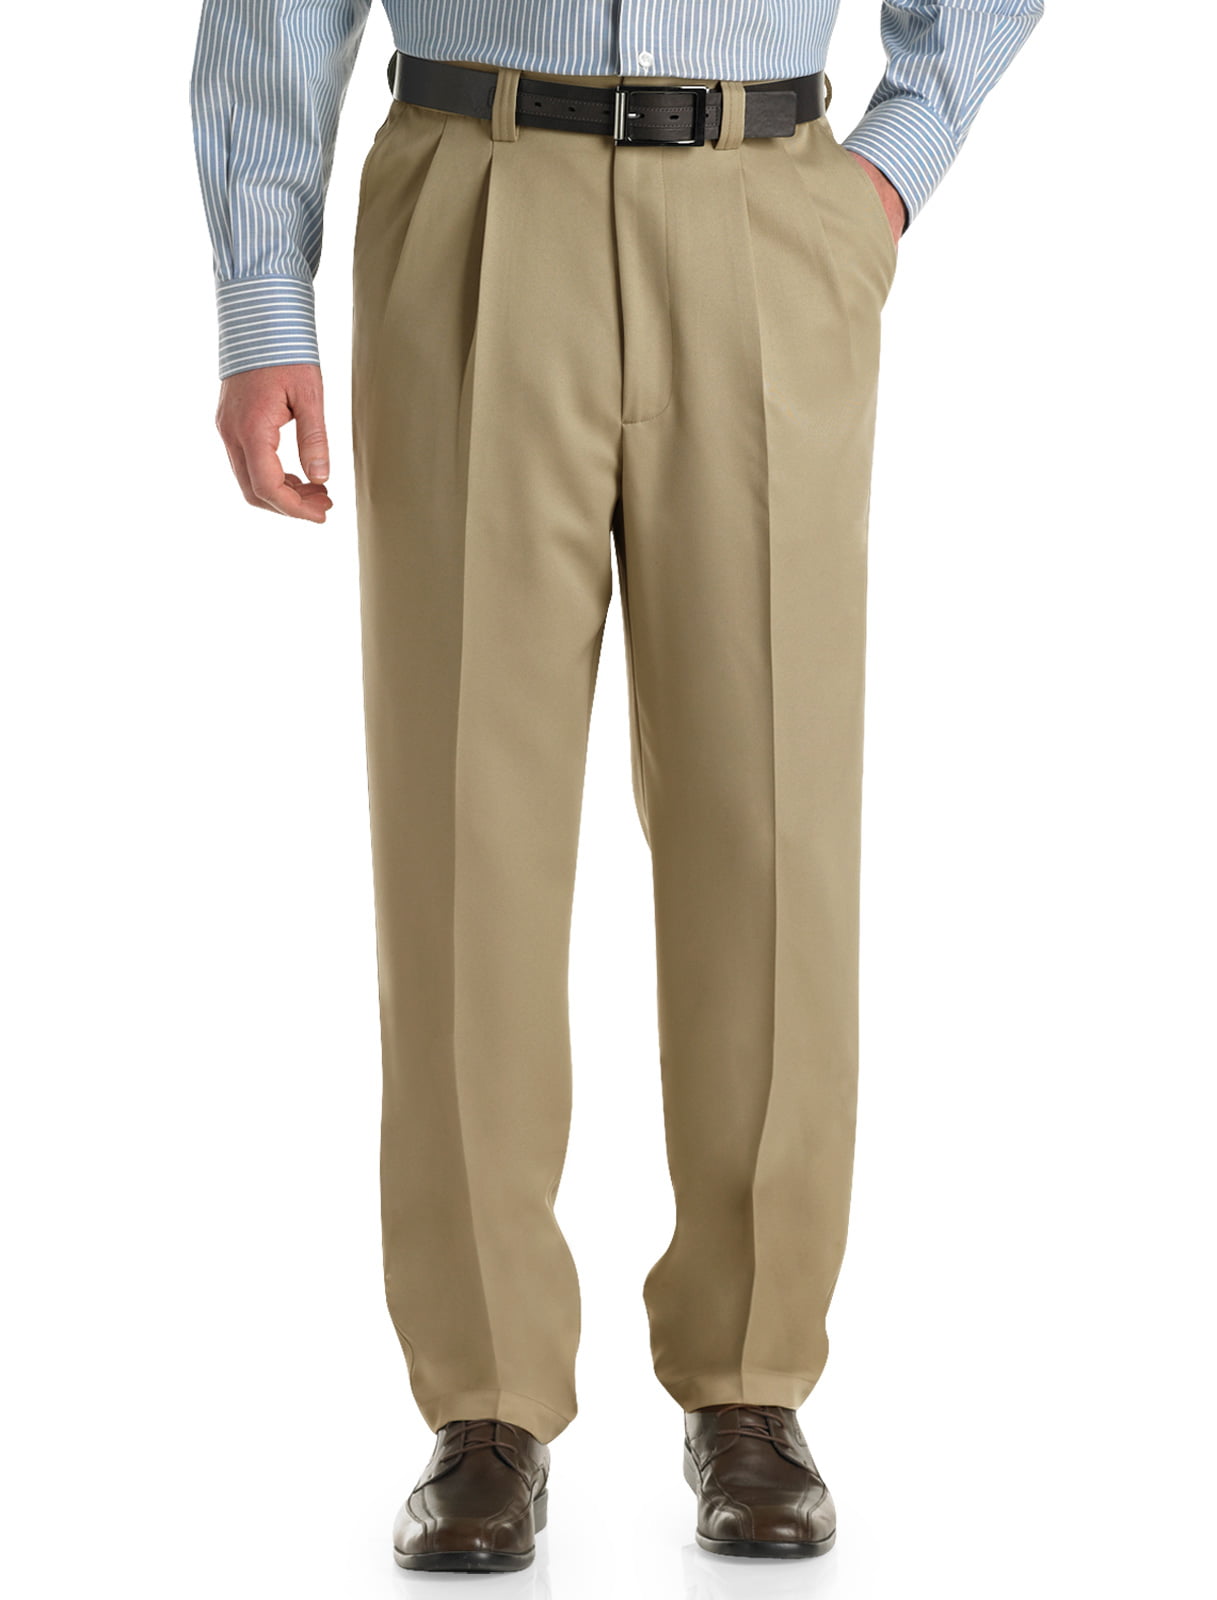 Oak Hill by DXL Big and Tall Waist-Relaxer Premium Pleated Pants